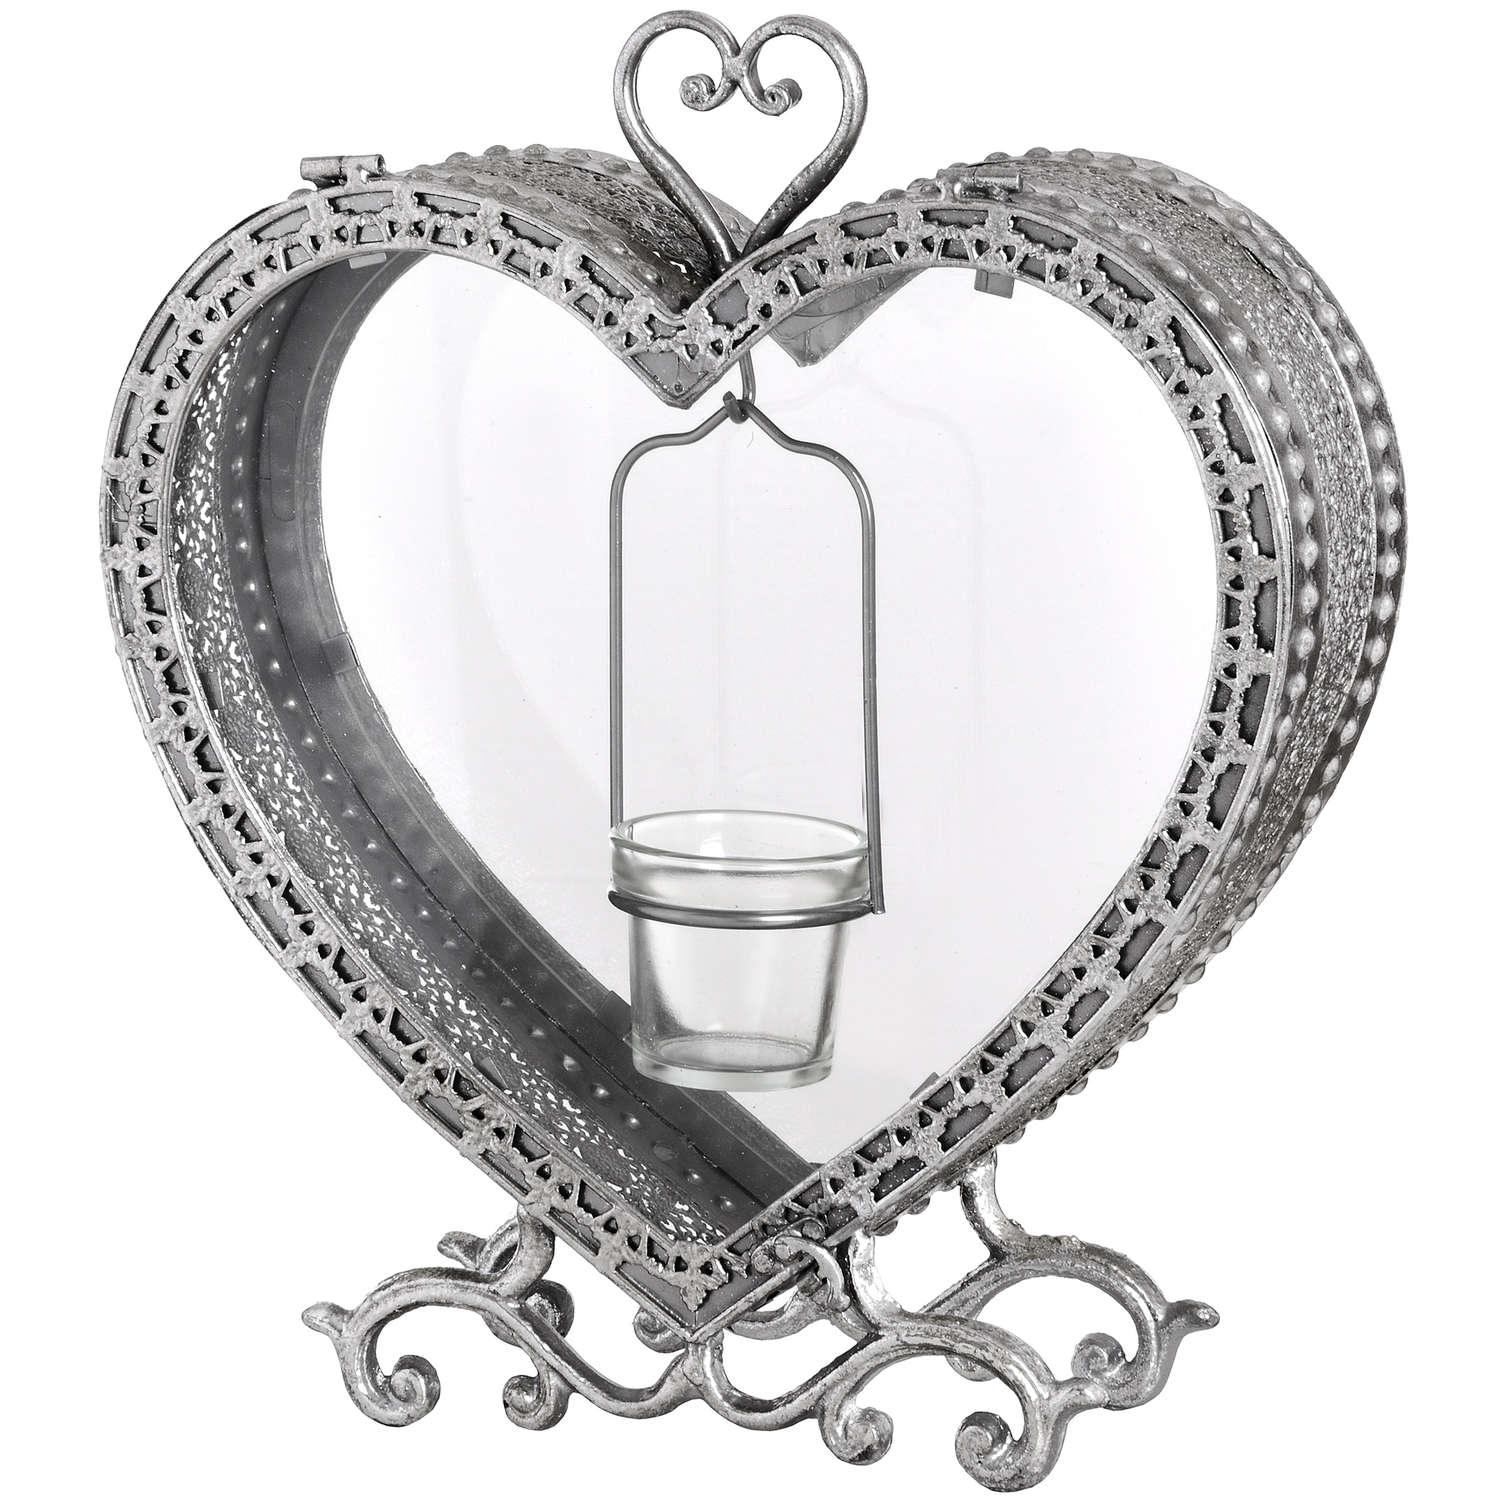 View Free Standing Heart Tealight Lantern in Antique Silver information